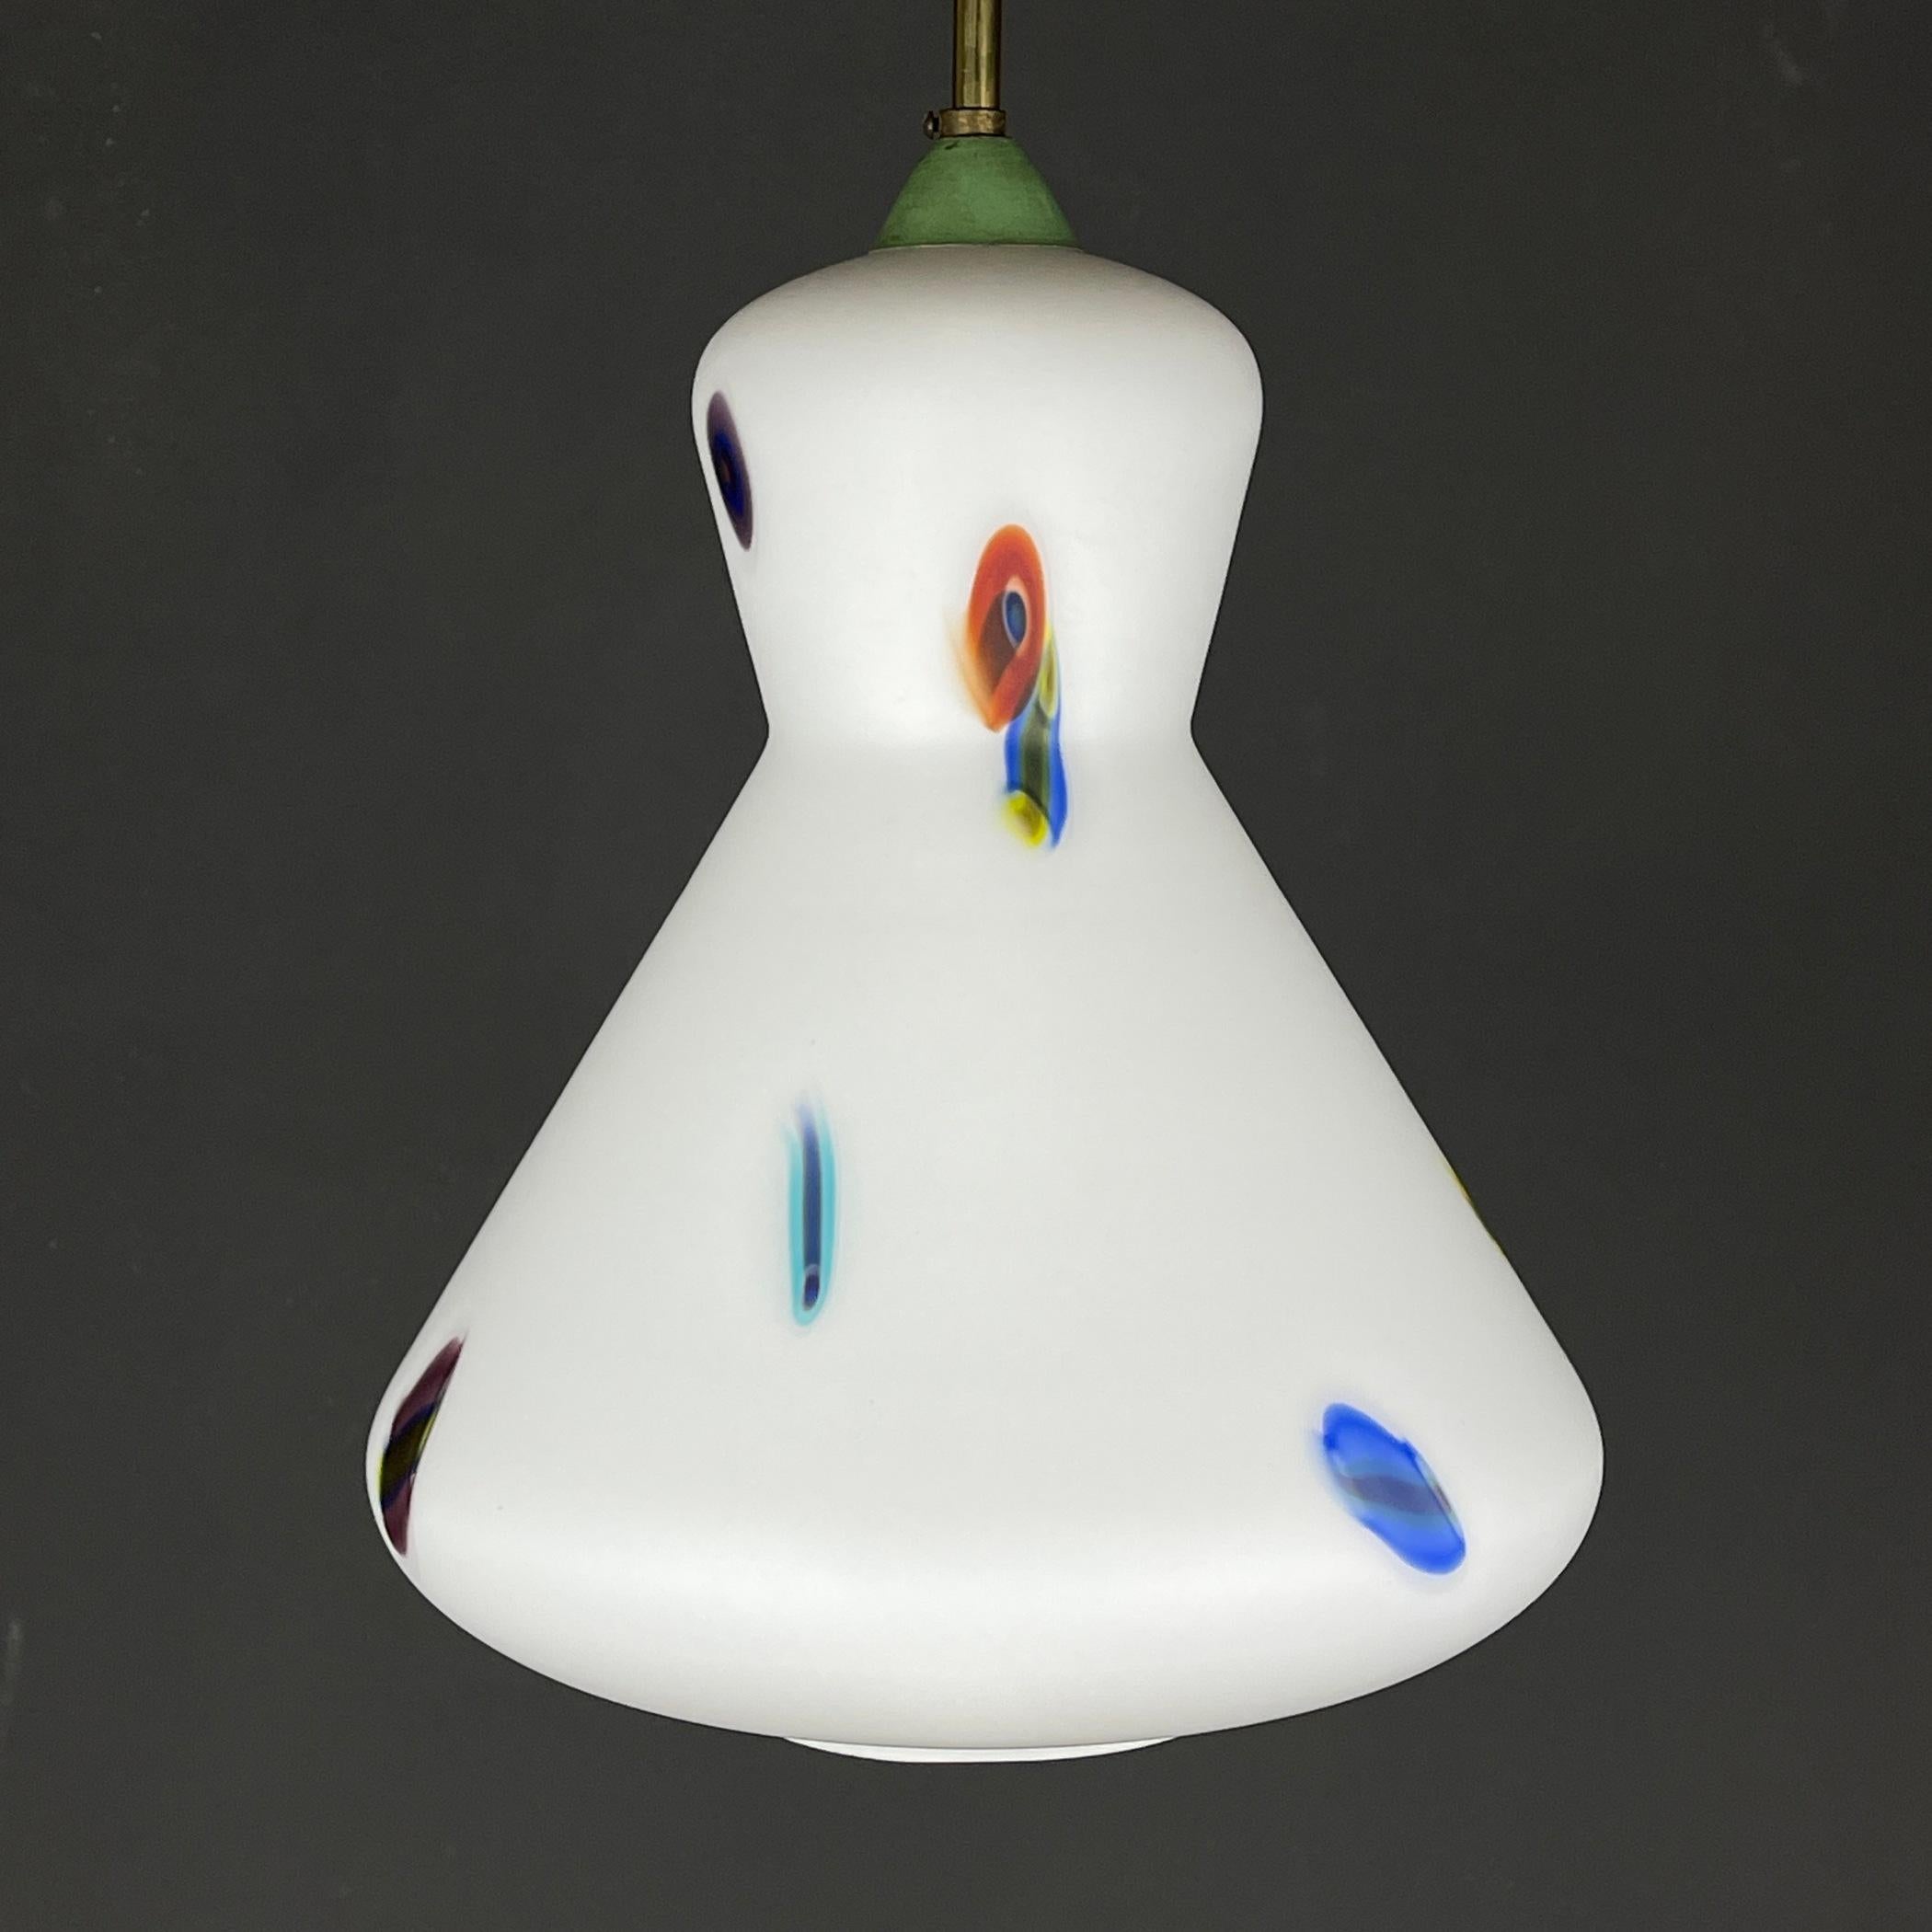 Midcentury Multicolor Opaline Murano Glass Pendant Lamp by Stilnovo Italy 1950s For Sale 6